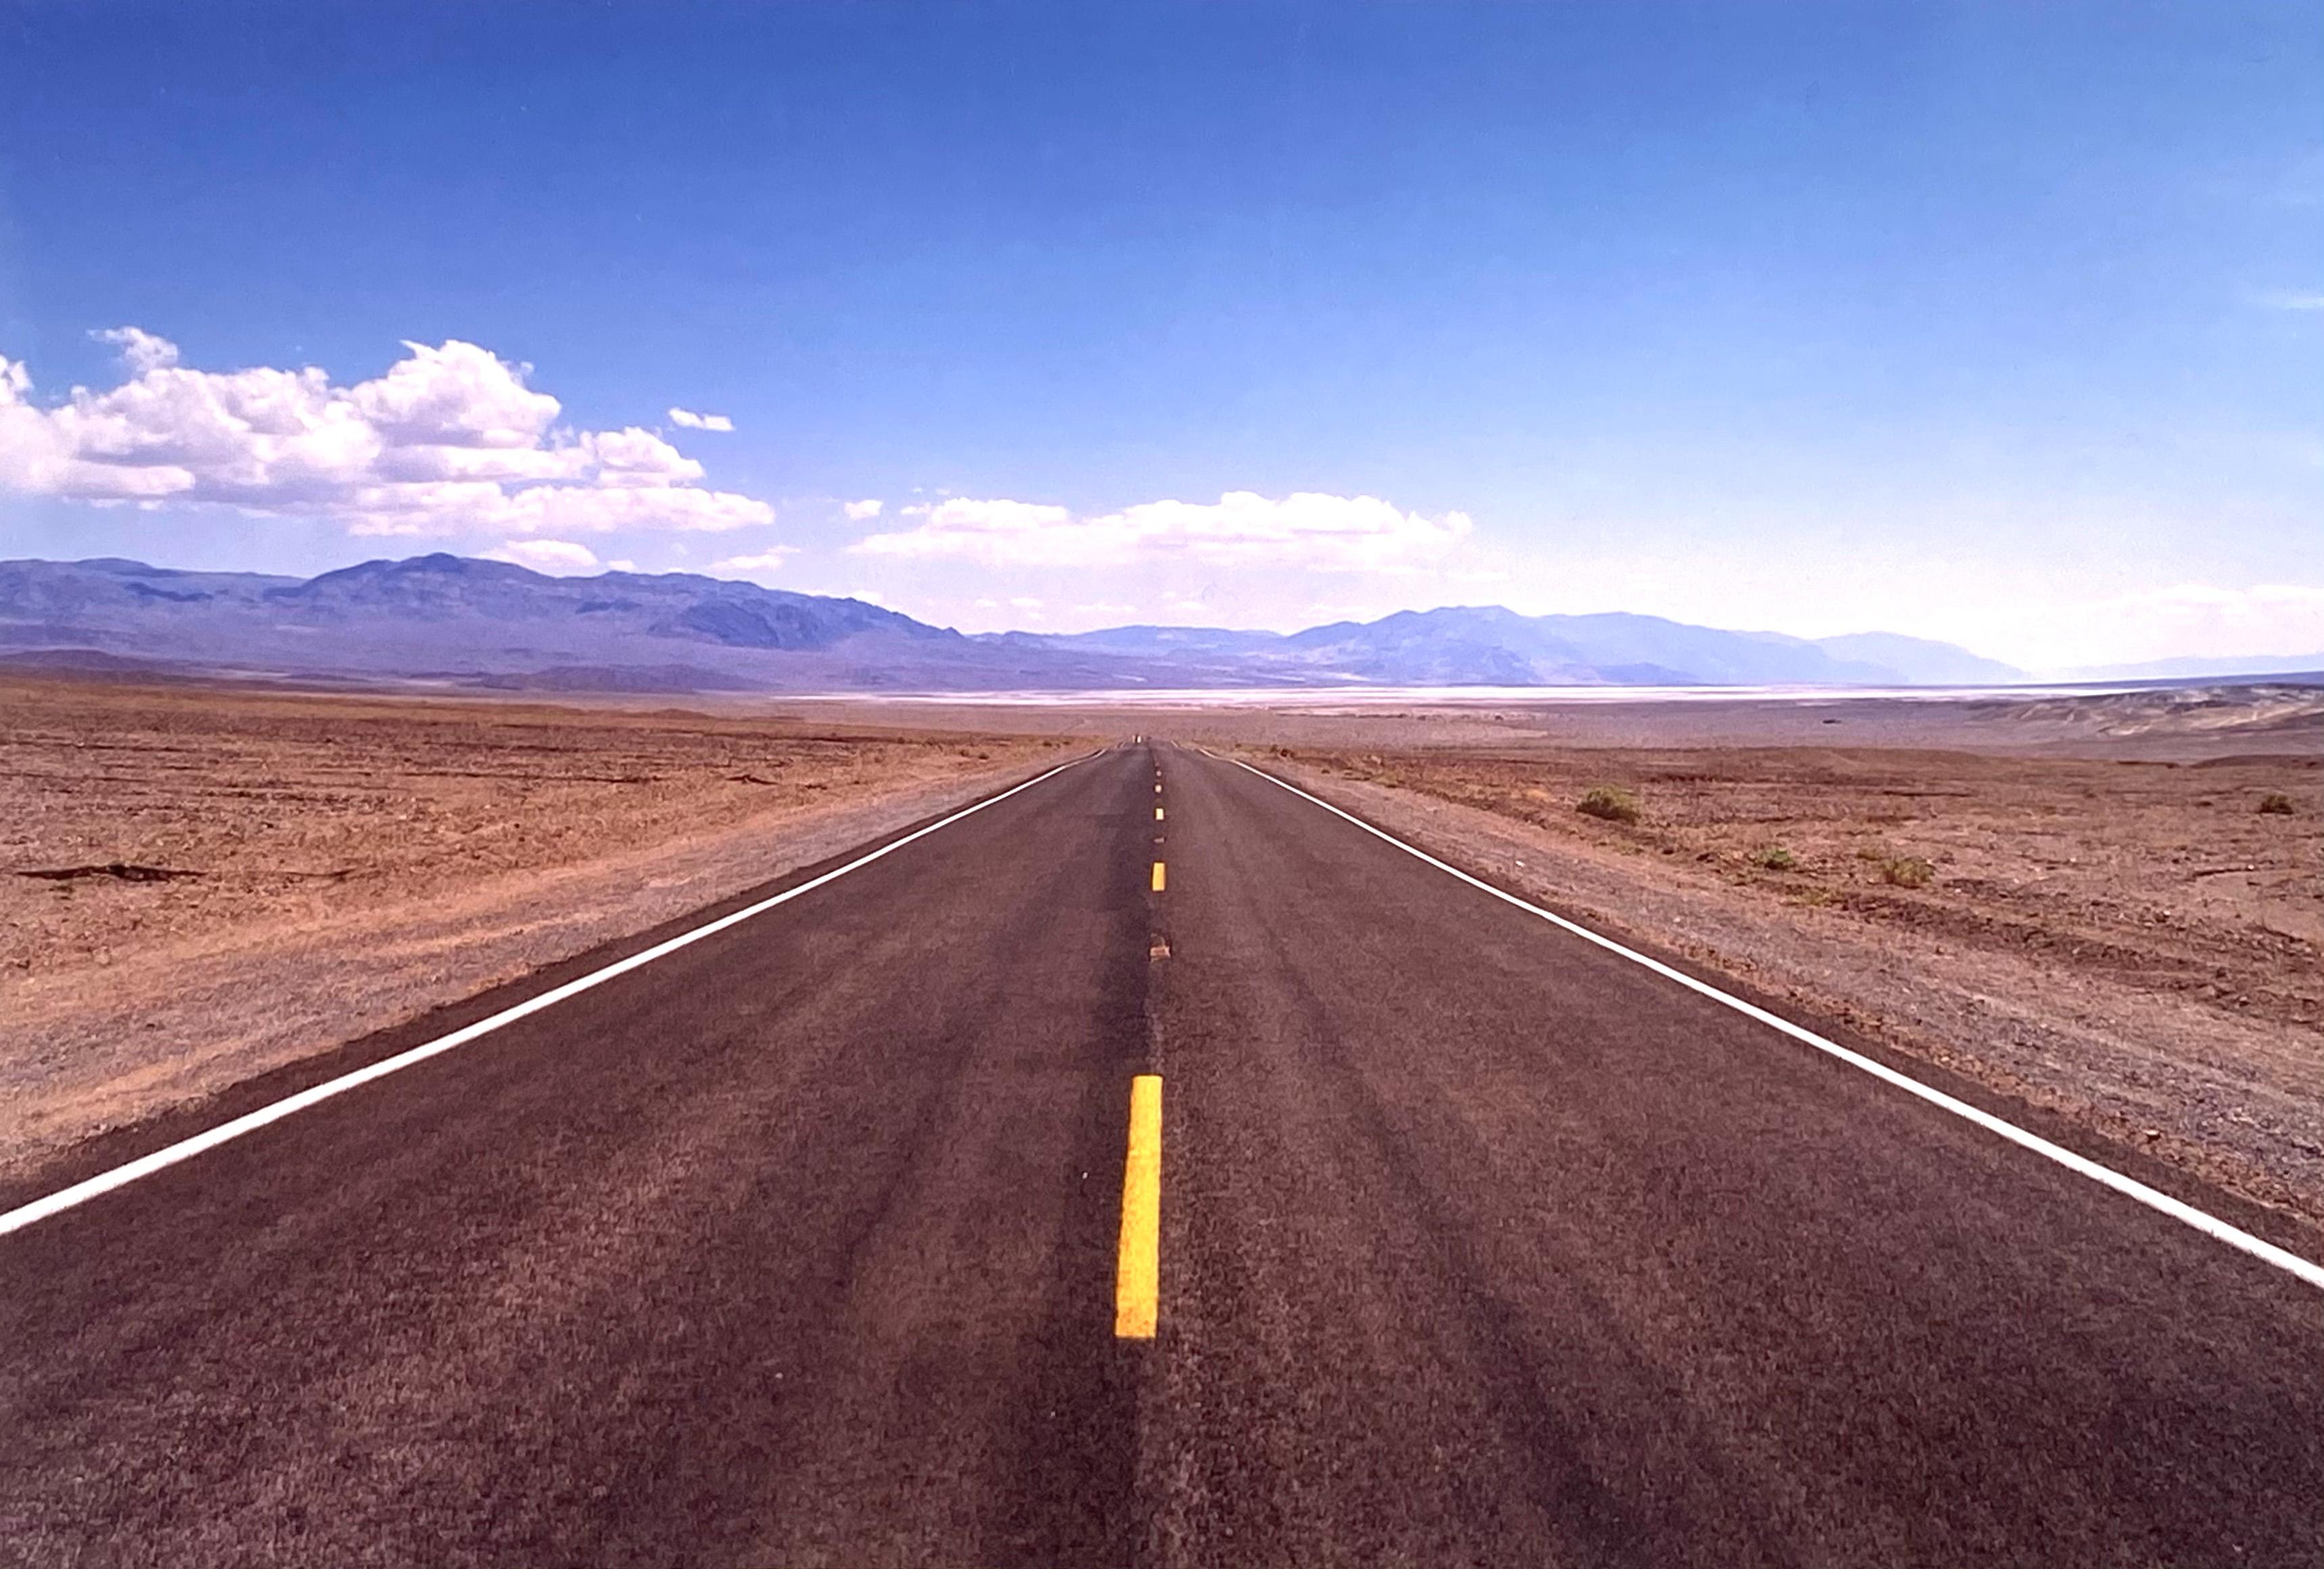 Richard Heeps Print - The Road to Death Valley, Mojave Desert, California - Landscape Color Photo